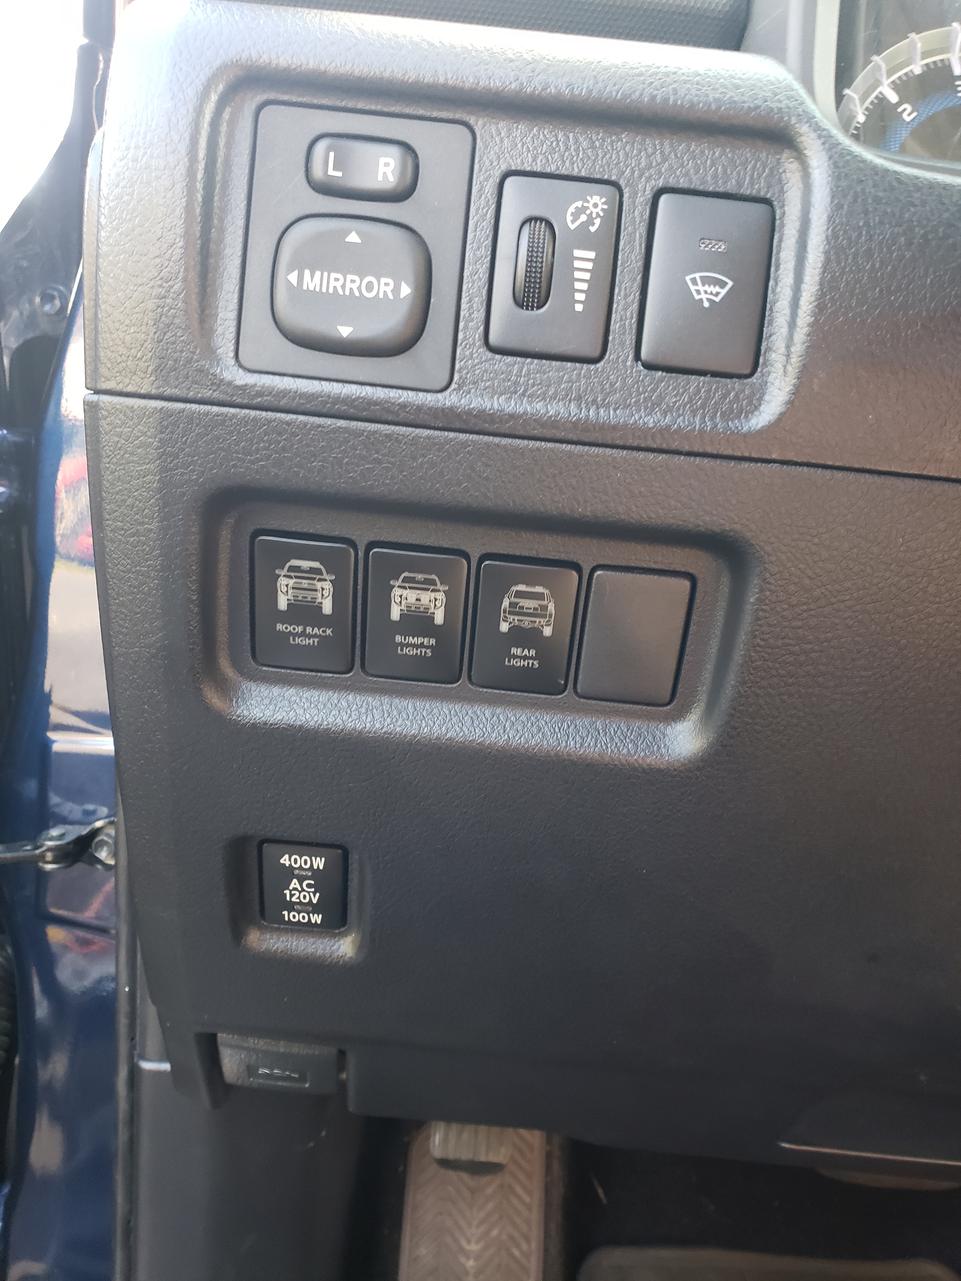 lets see your interior mods-20181001_164056-jpg